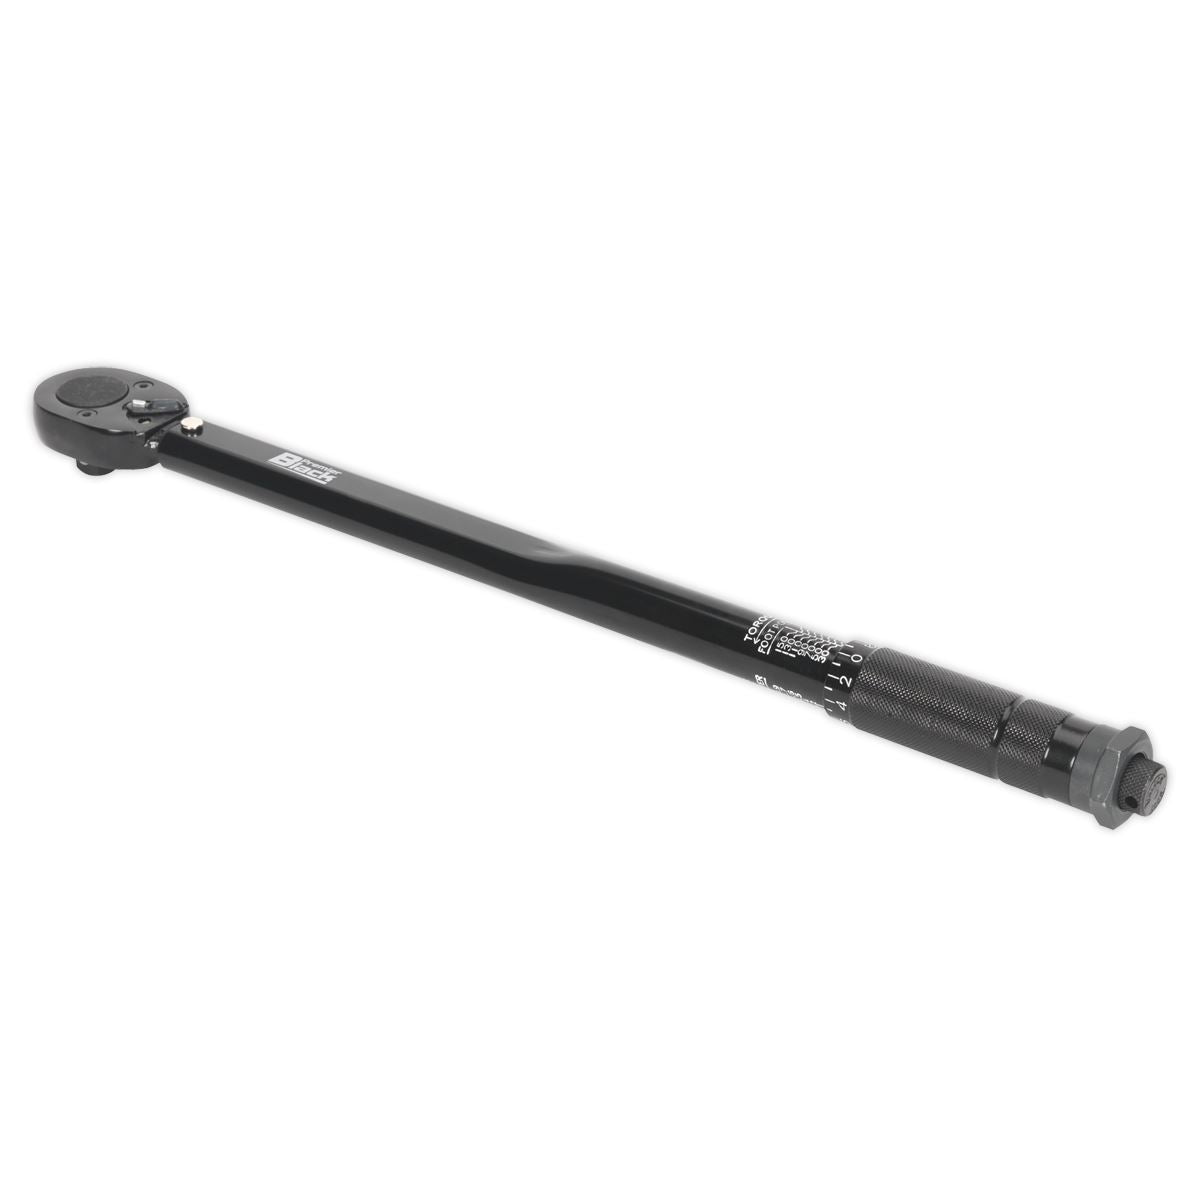 Sealey Micrometer Torque Wrench 1/2"Sq Dr Calibrated Black Series AK624B